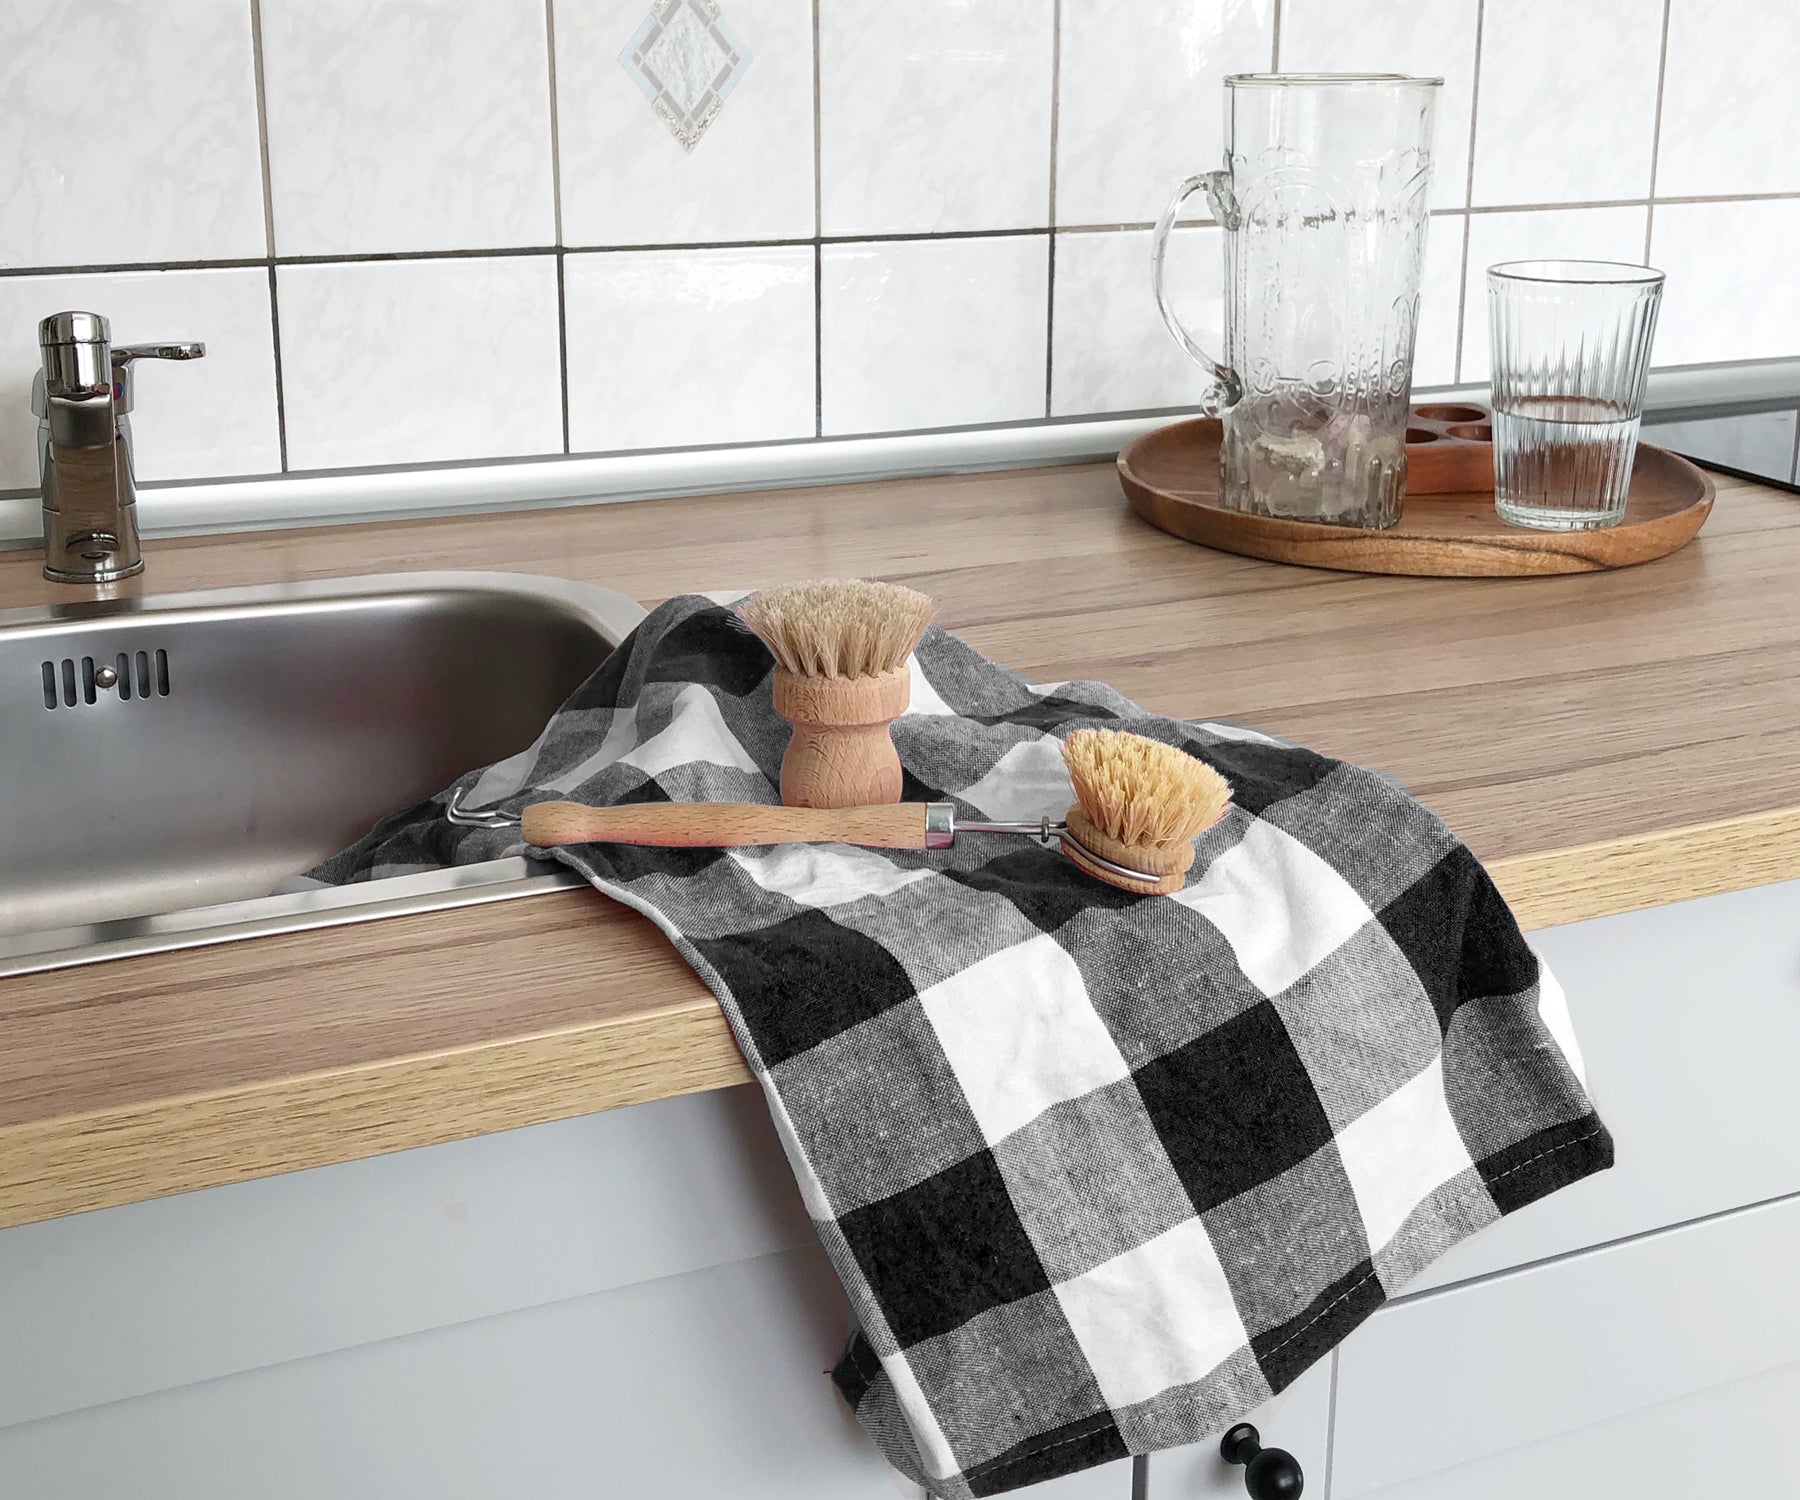 Whether you're cooking up a storm or cleaning up after a meal, our kitchen towels and dishcloths sets are up to the task